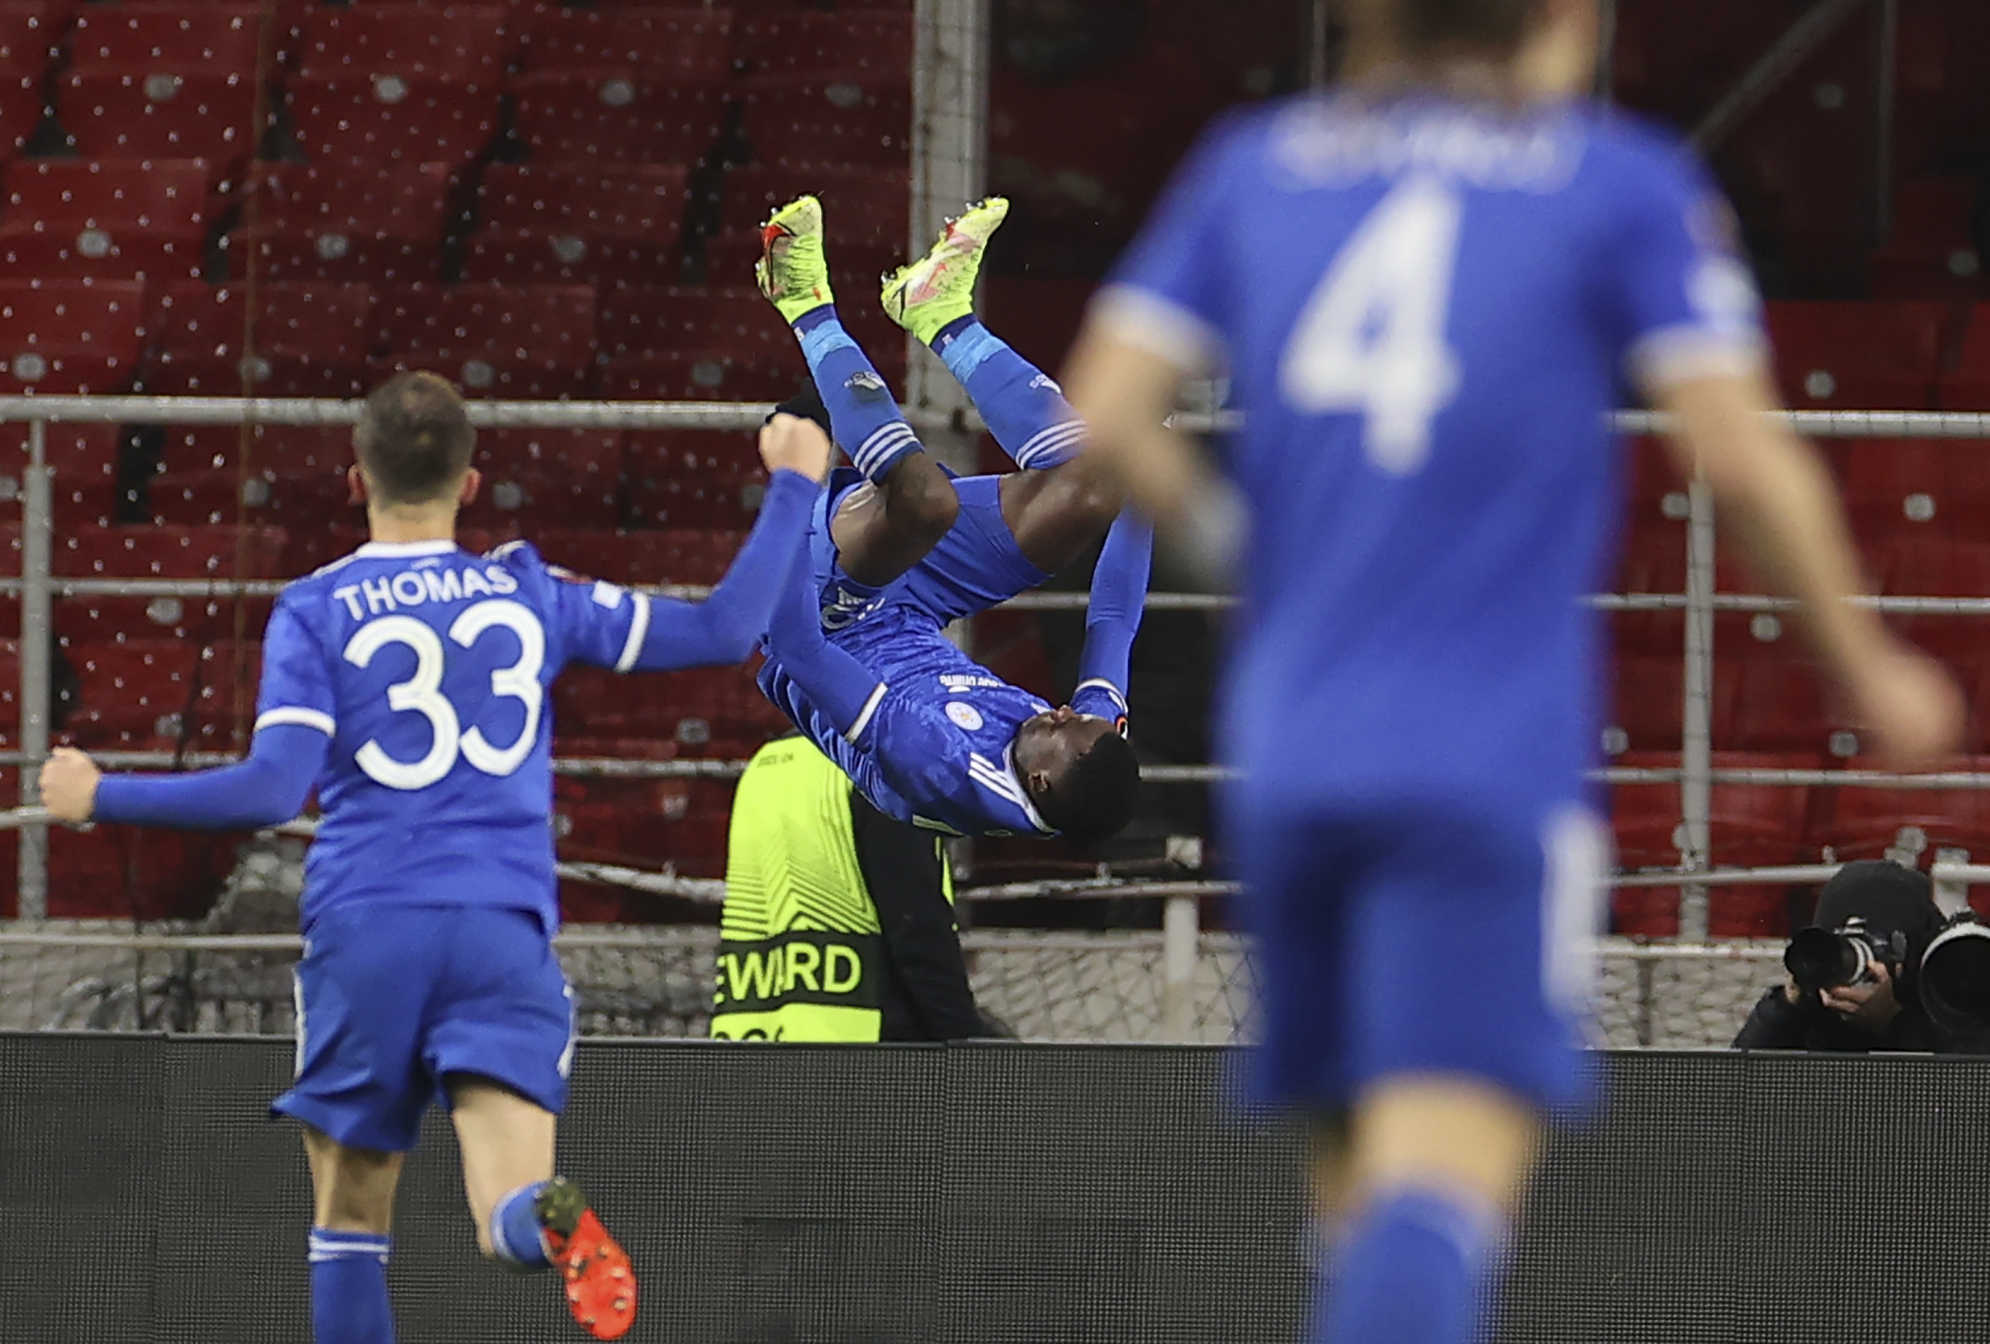 Leicester's Patson Daka celebrates after scoring his side's third goal during Wednesday's match between Spartak Moscow and Leicester City.